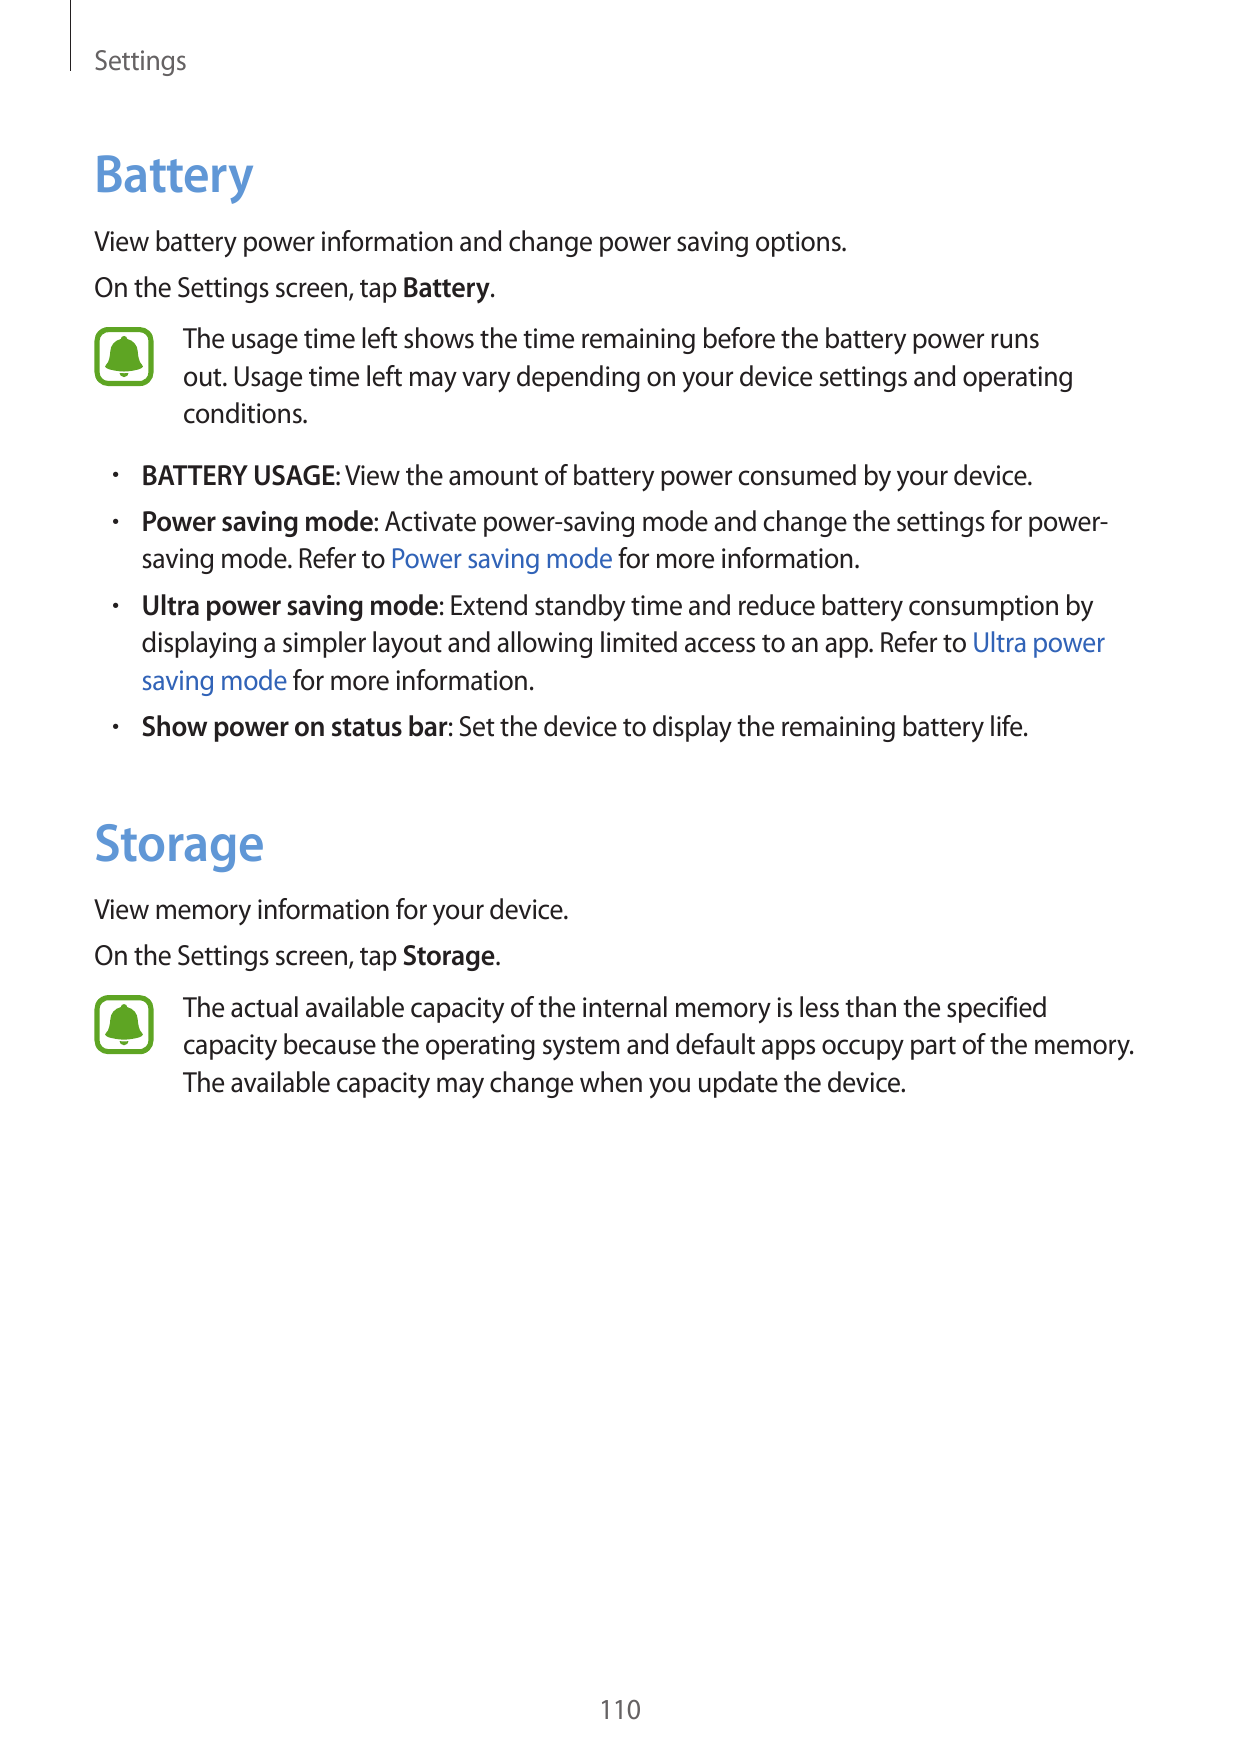 SettingsBatteryView battery power information and change power saving options.On the Settings screen, tap Battery.The usage time